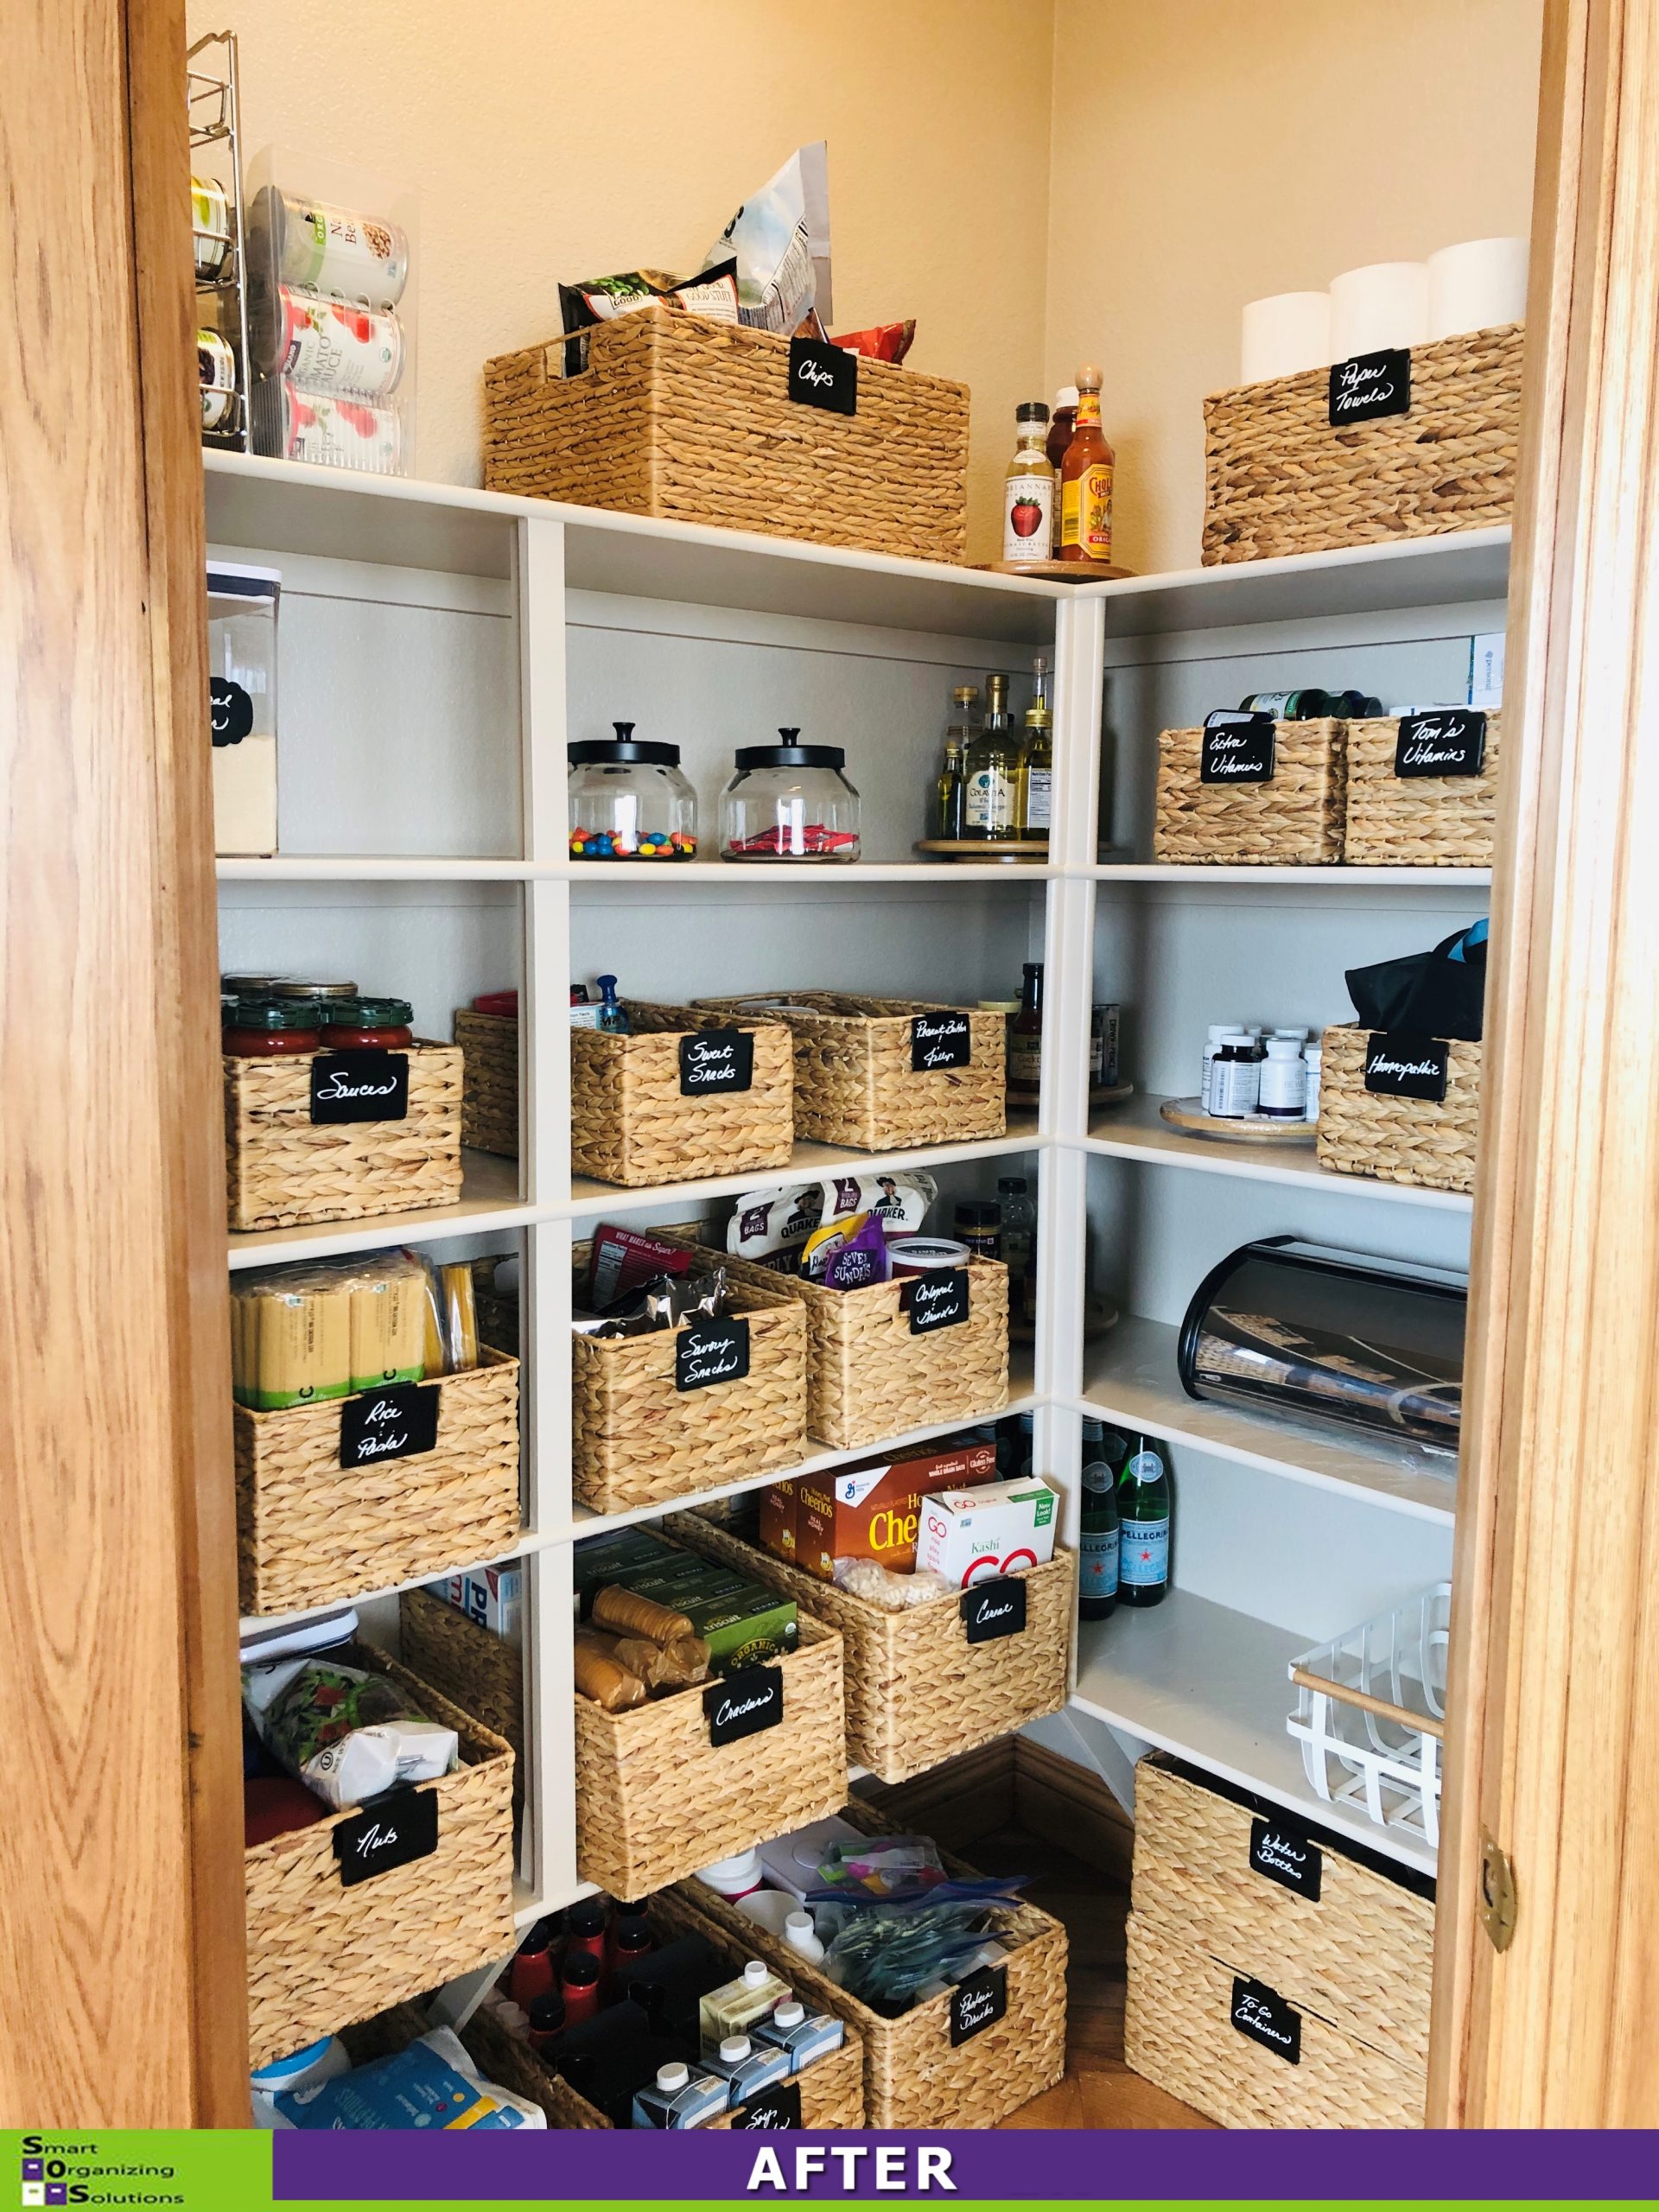 Pantry Organization 101 [Step by Step] - Shuangy's Kitchen Sink